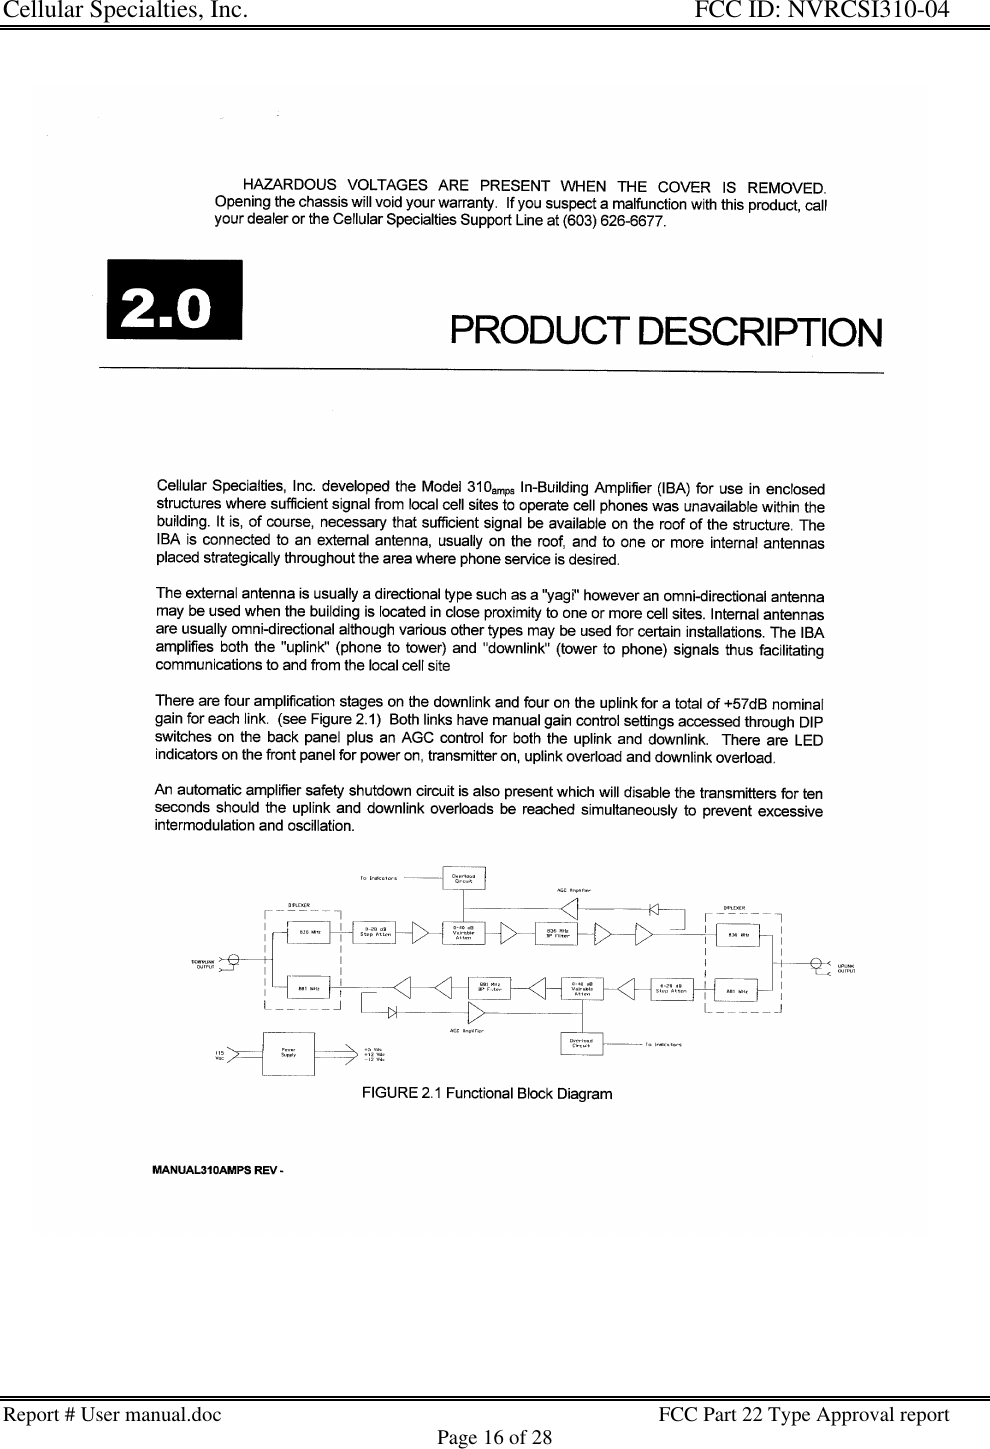 Cellular Specialties, Inc. FCC ID: NVRCSI310-04Report # User manual.doc FCC Part 22 Type Approval reportPage 16 of 28